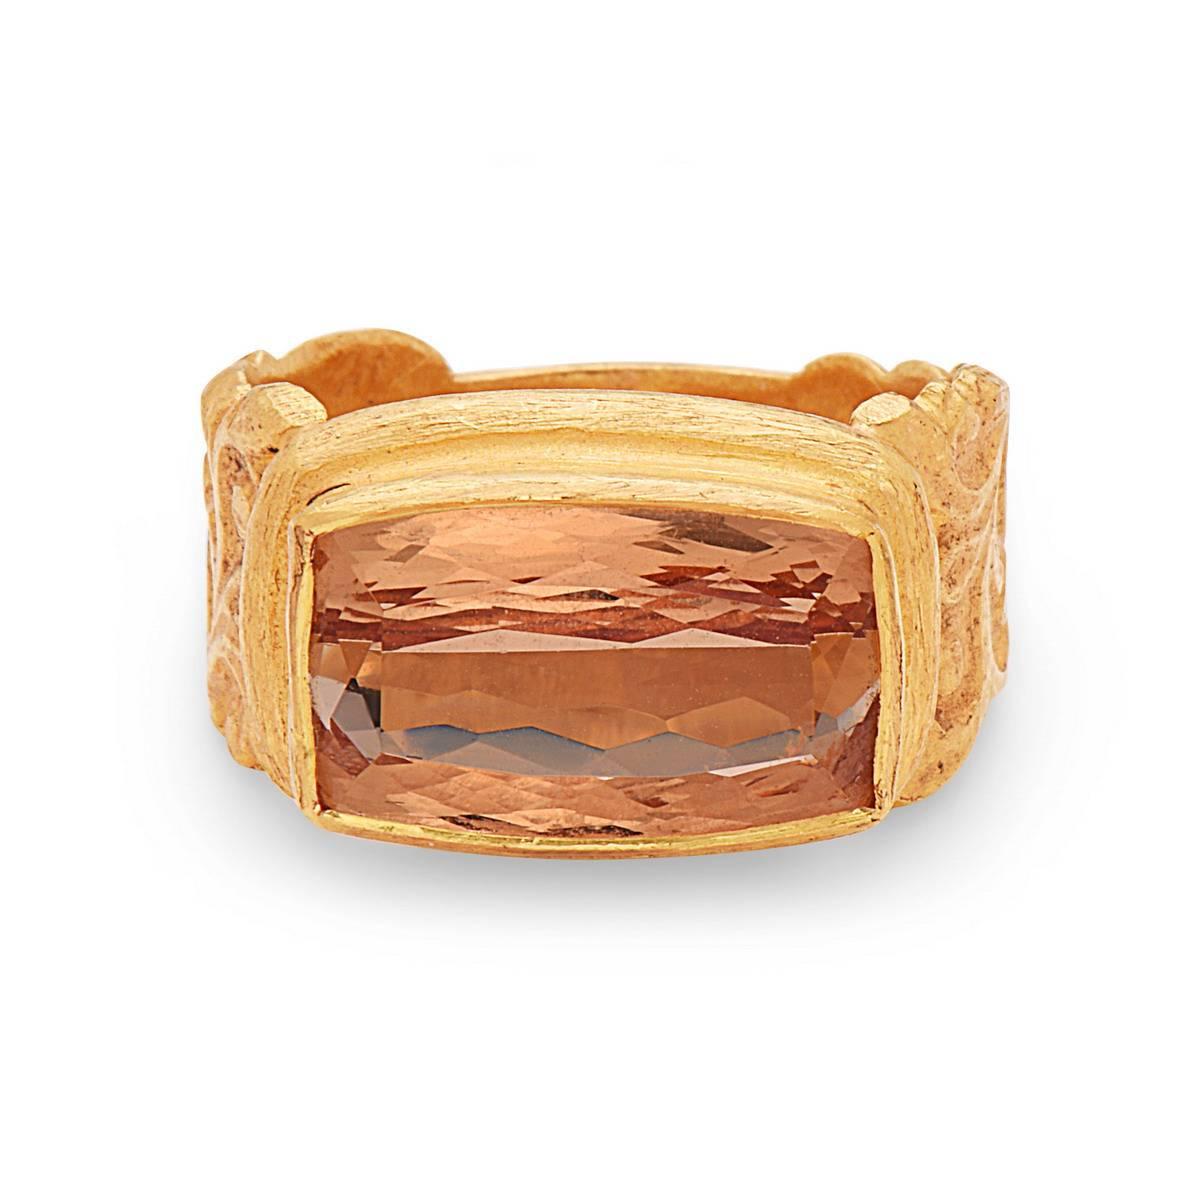 Perfectly cut and handcrafted barrel shape precious topaz cocktail ring in 22K yellow gold with a beautifully carved shank.

Ring Size : 7 ( Can be sized )
22kt: 10.13gm
Precious Topaz: 5.85cts

